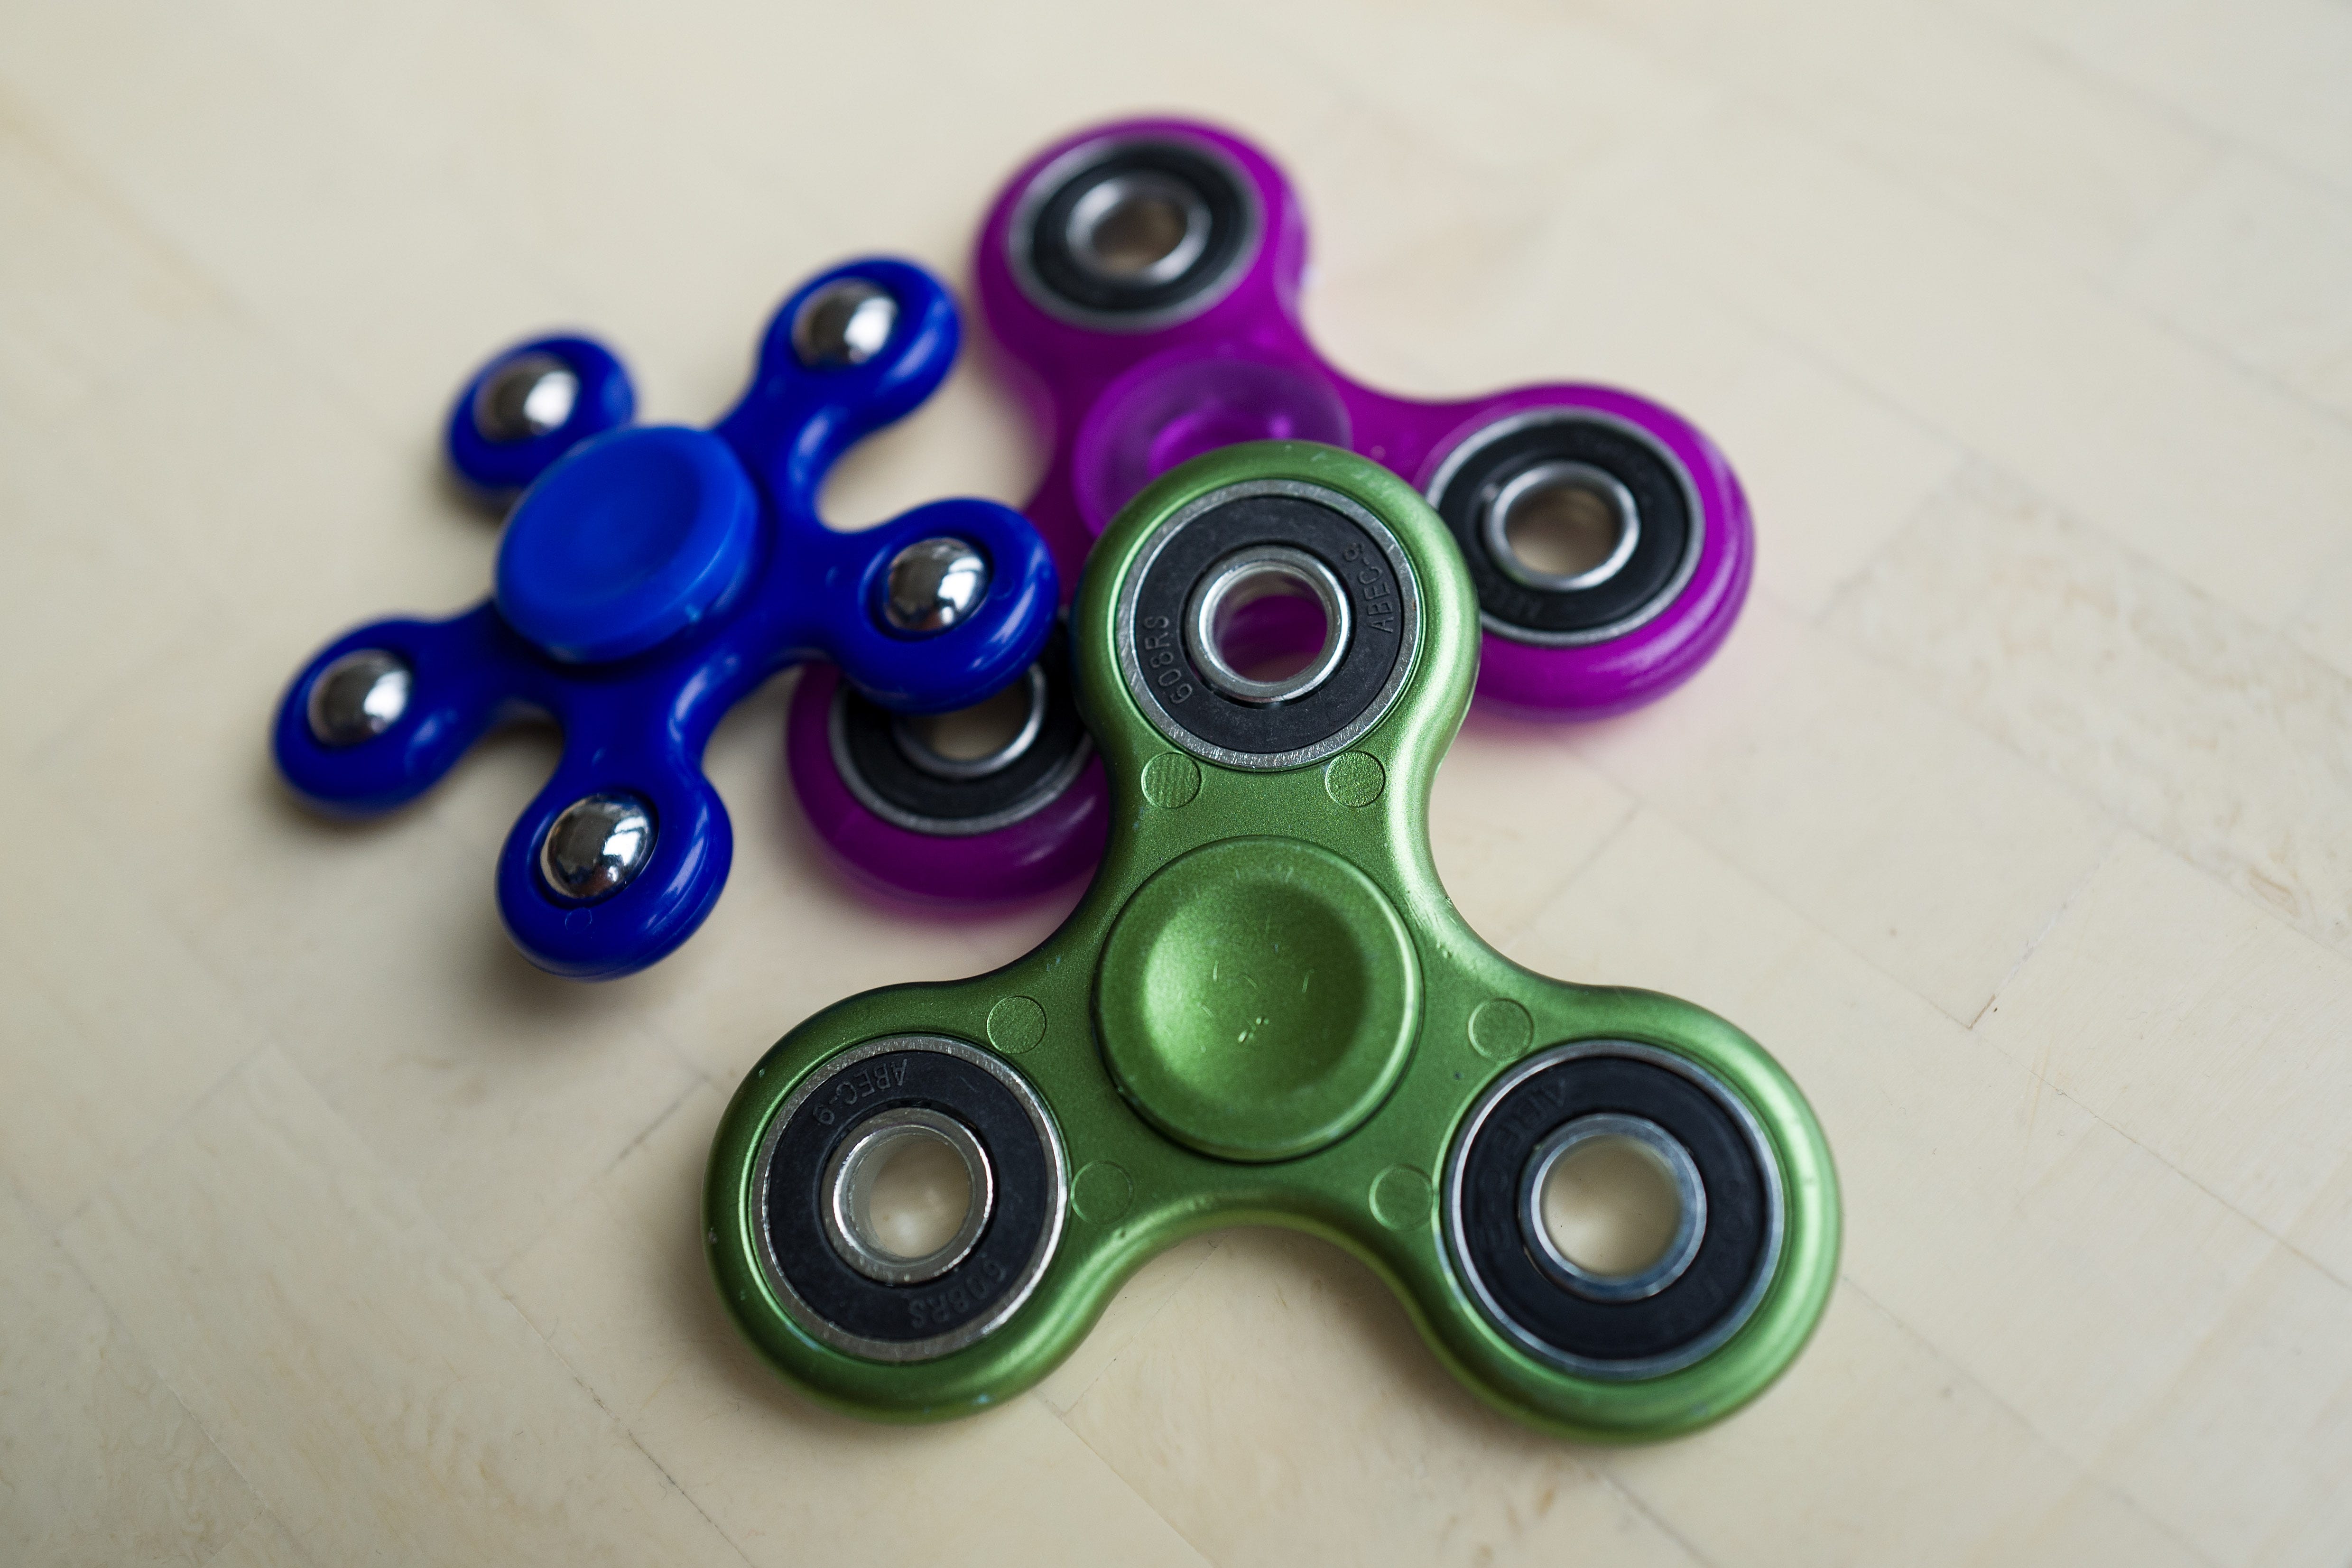 who made the first fidget spinner